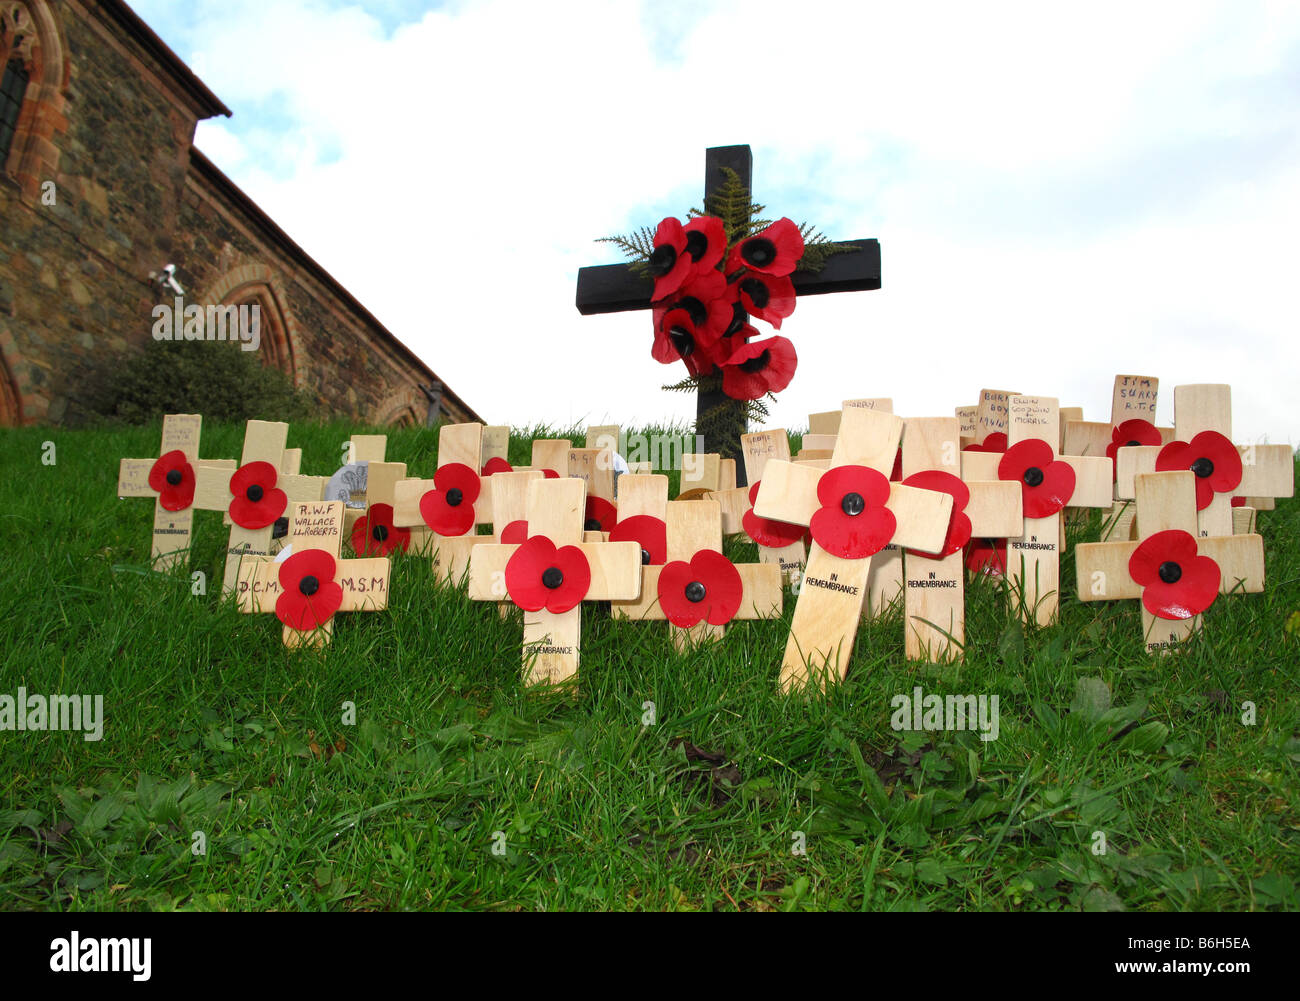 Personal symbolic poppy rememberance crucifixes in churchyard on Remembrance Sunday Stock Photo